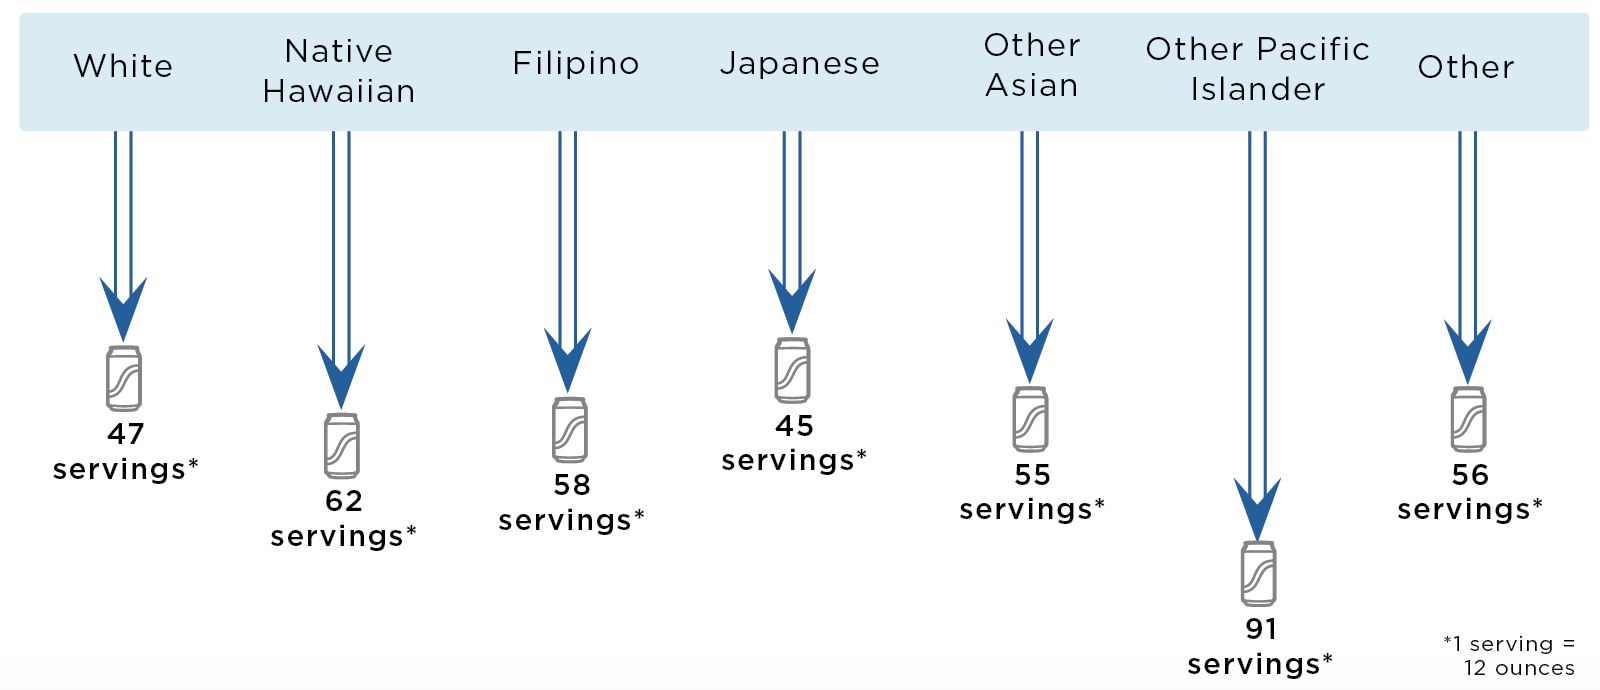 In the first year of fee implementation, White residents would drink 47 fewer 12 ounce servings of sugary drinks per person; Native Hawaiian residents would drink 62 fewer 12 ounce servings of sugary drinks per person; Filipino residents would drink 58 fewer 12 ounce servings of sugary drinks per person; Japanese residents would drink 45 fewer 12 ounce servings of sugary drinks per person; Other Asian residents would drink 55 fewer 12 ounce servings of sugary drinks per person; Other Pacific Islander residents would drink 91 fewer 12 ounce servings of sugary drinks per person; and Residents of Other races would drink 56 fewer 12 ounce servings of sugary drinks per person